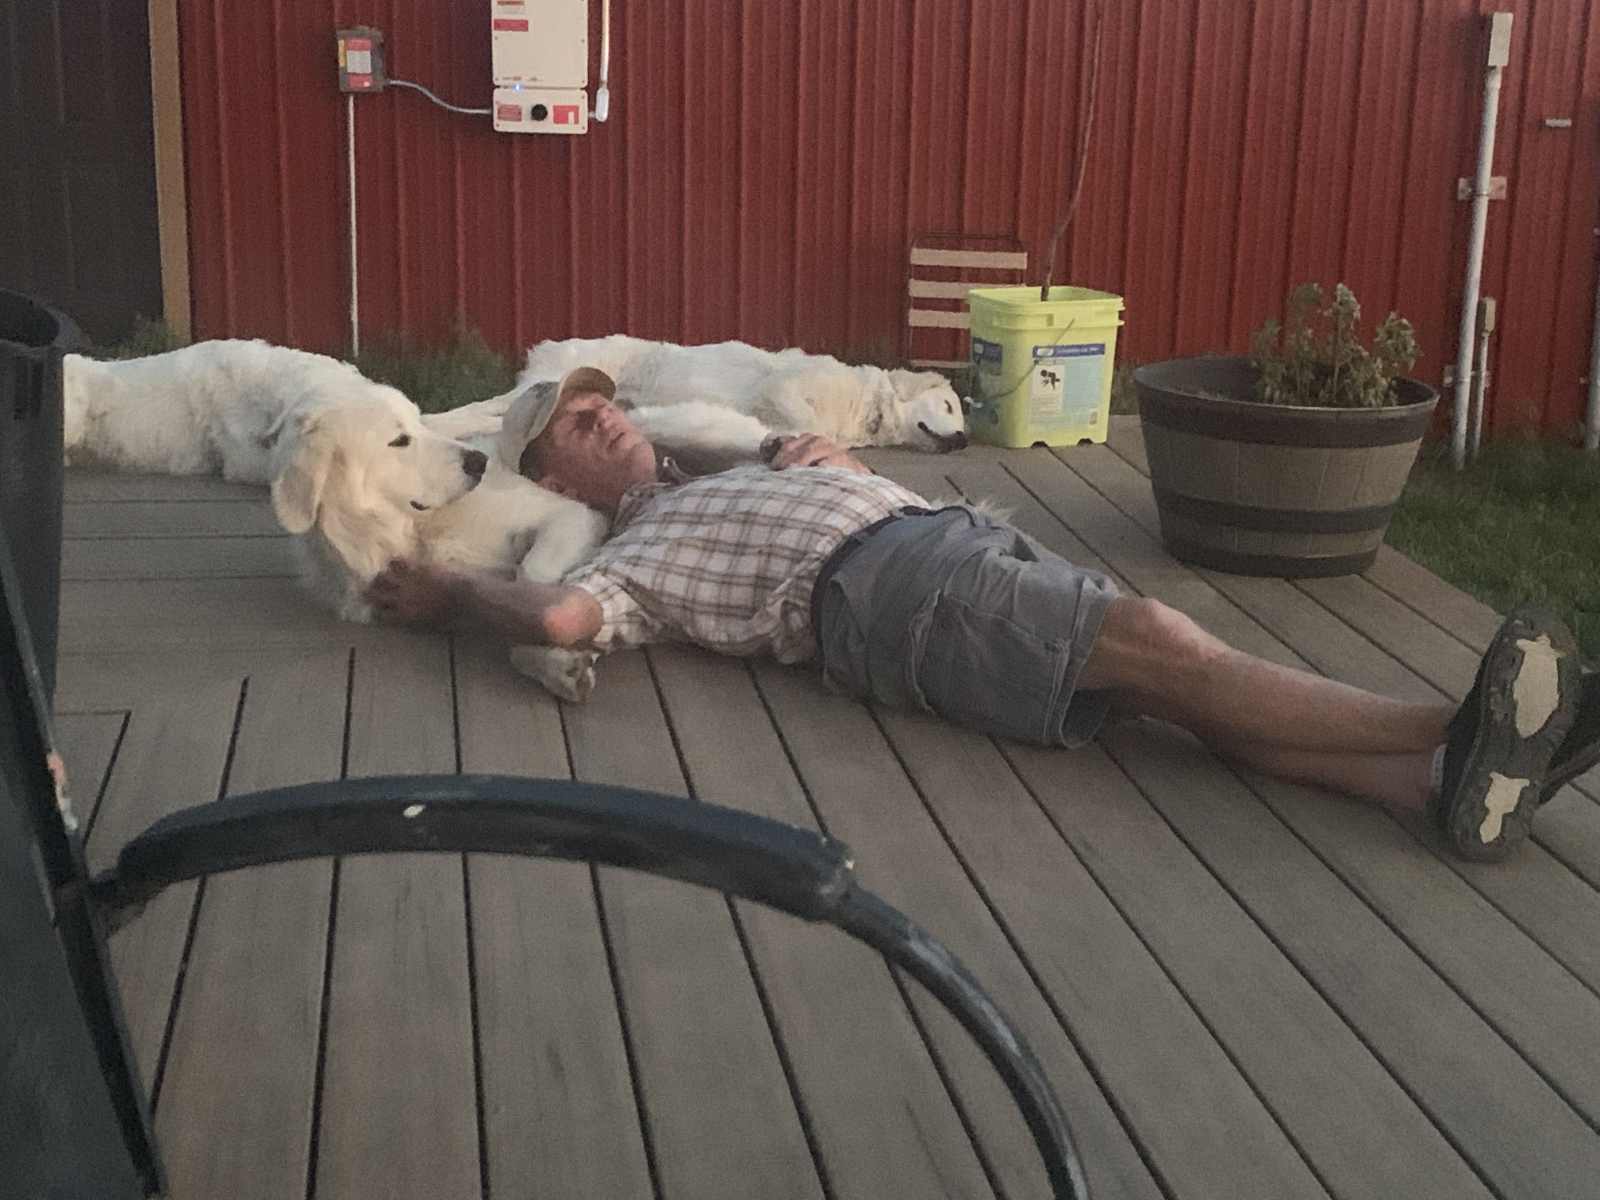 chris and two livestock guardian dogs take a nap break on the porch